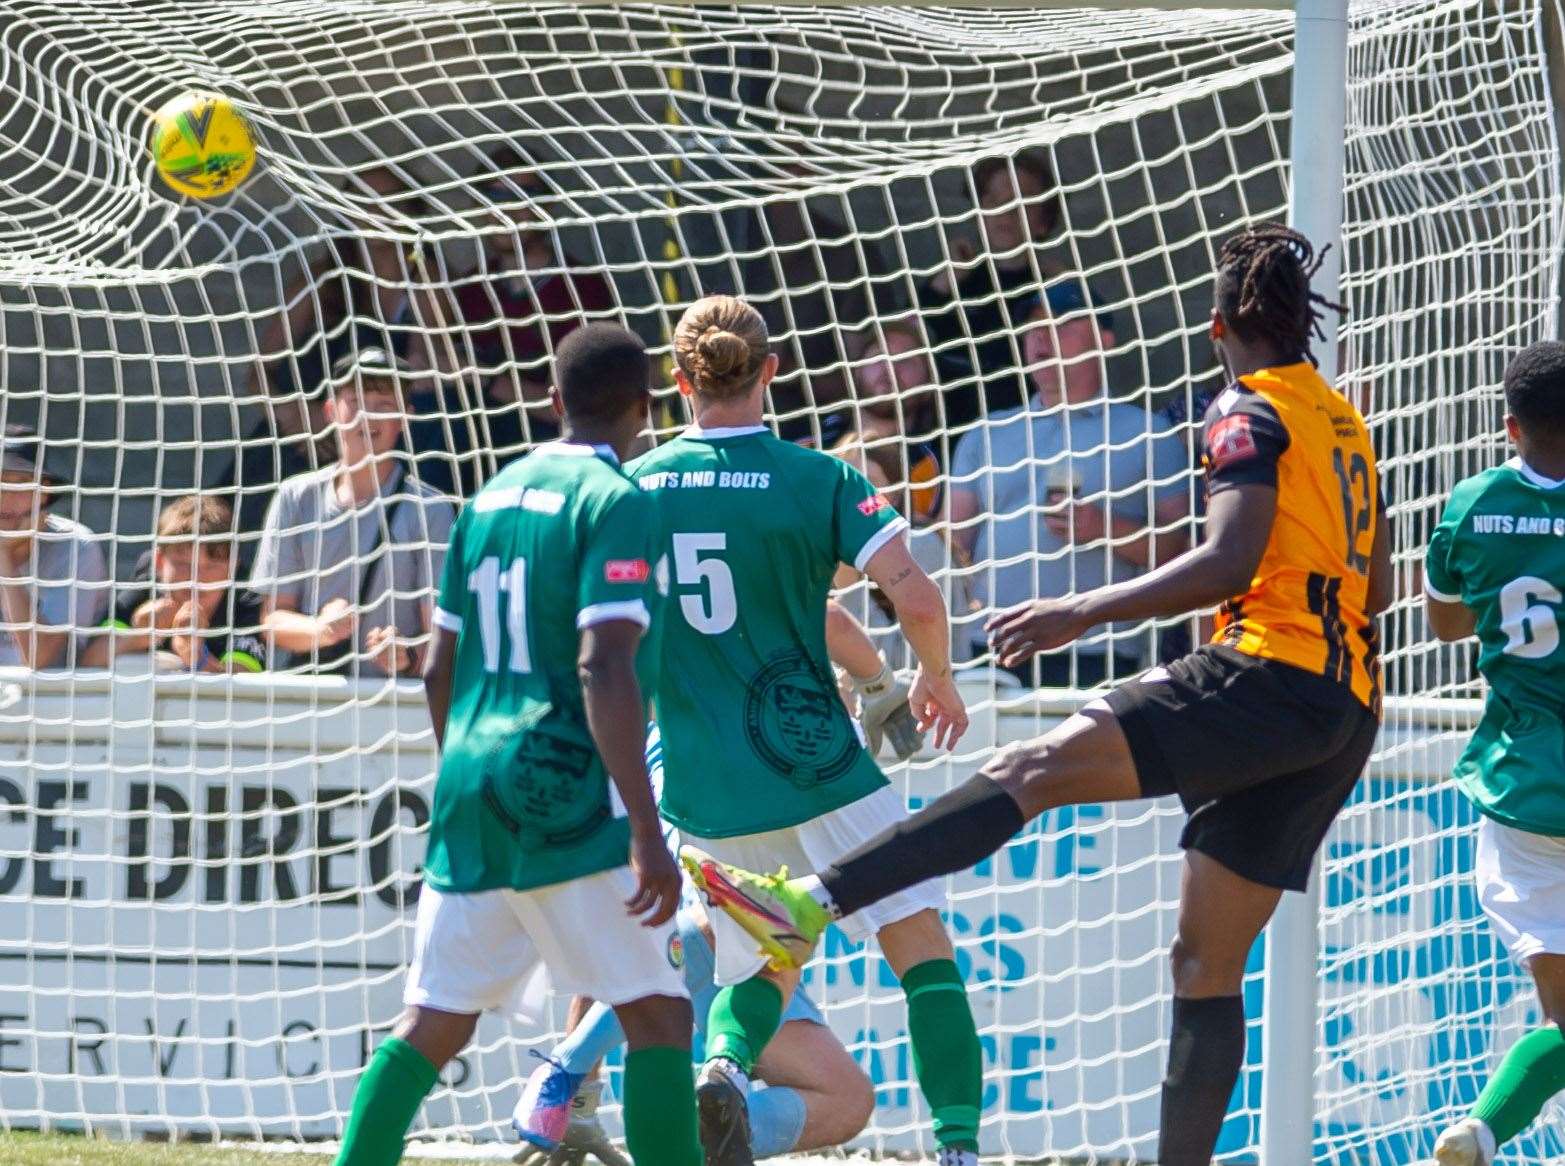 Ibrahim Olutade blasts home for Folkestone. Picture: Ian Scammell